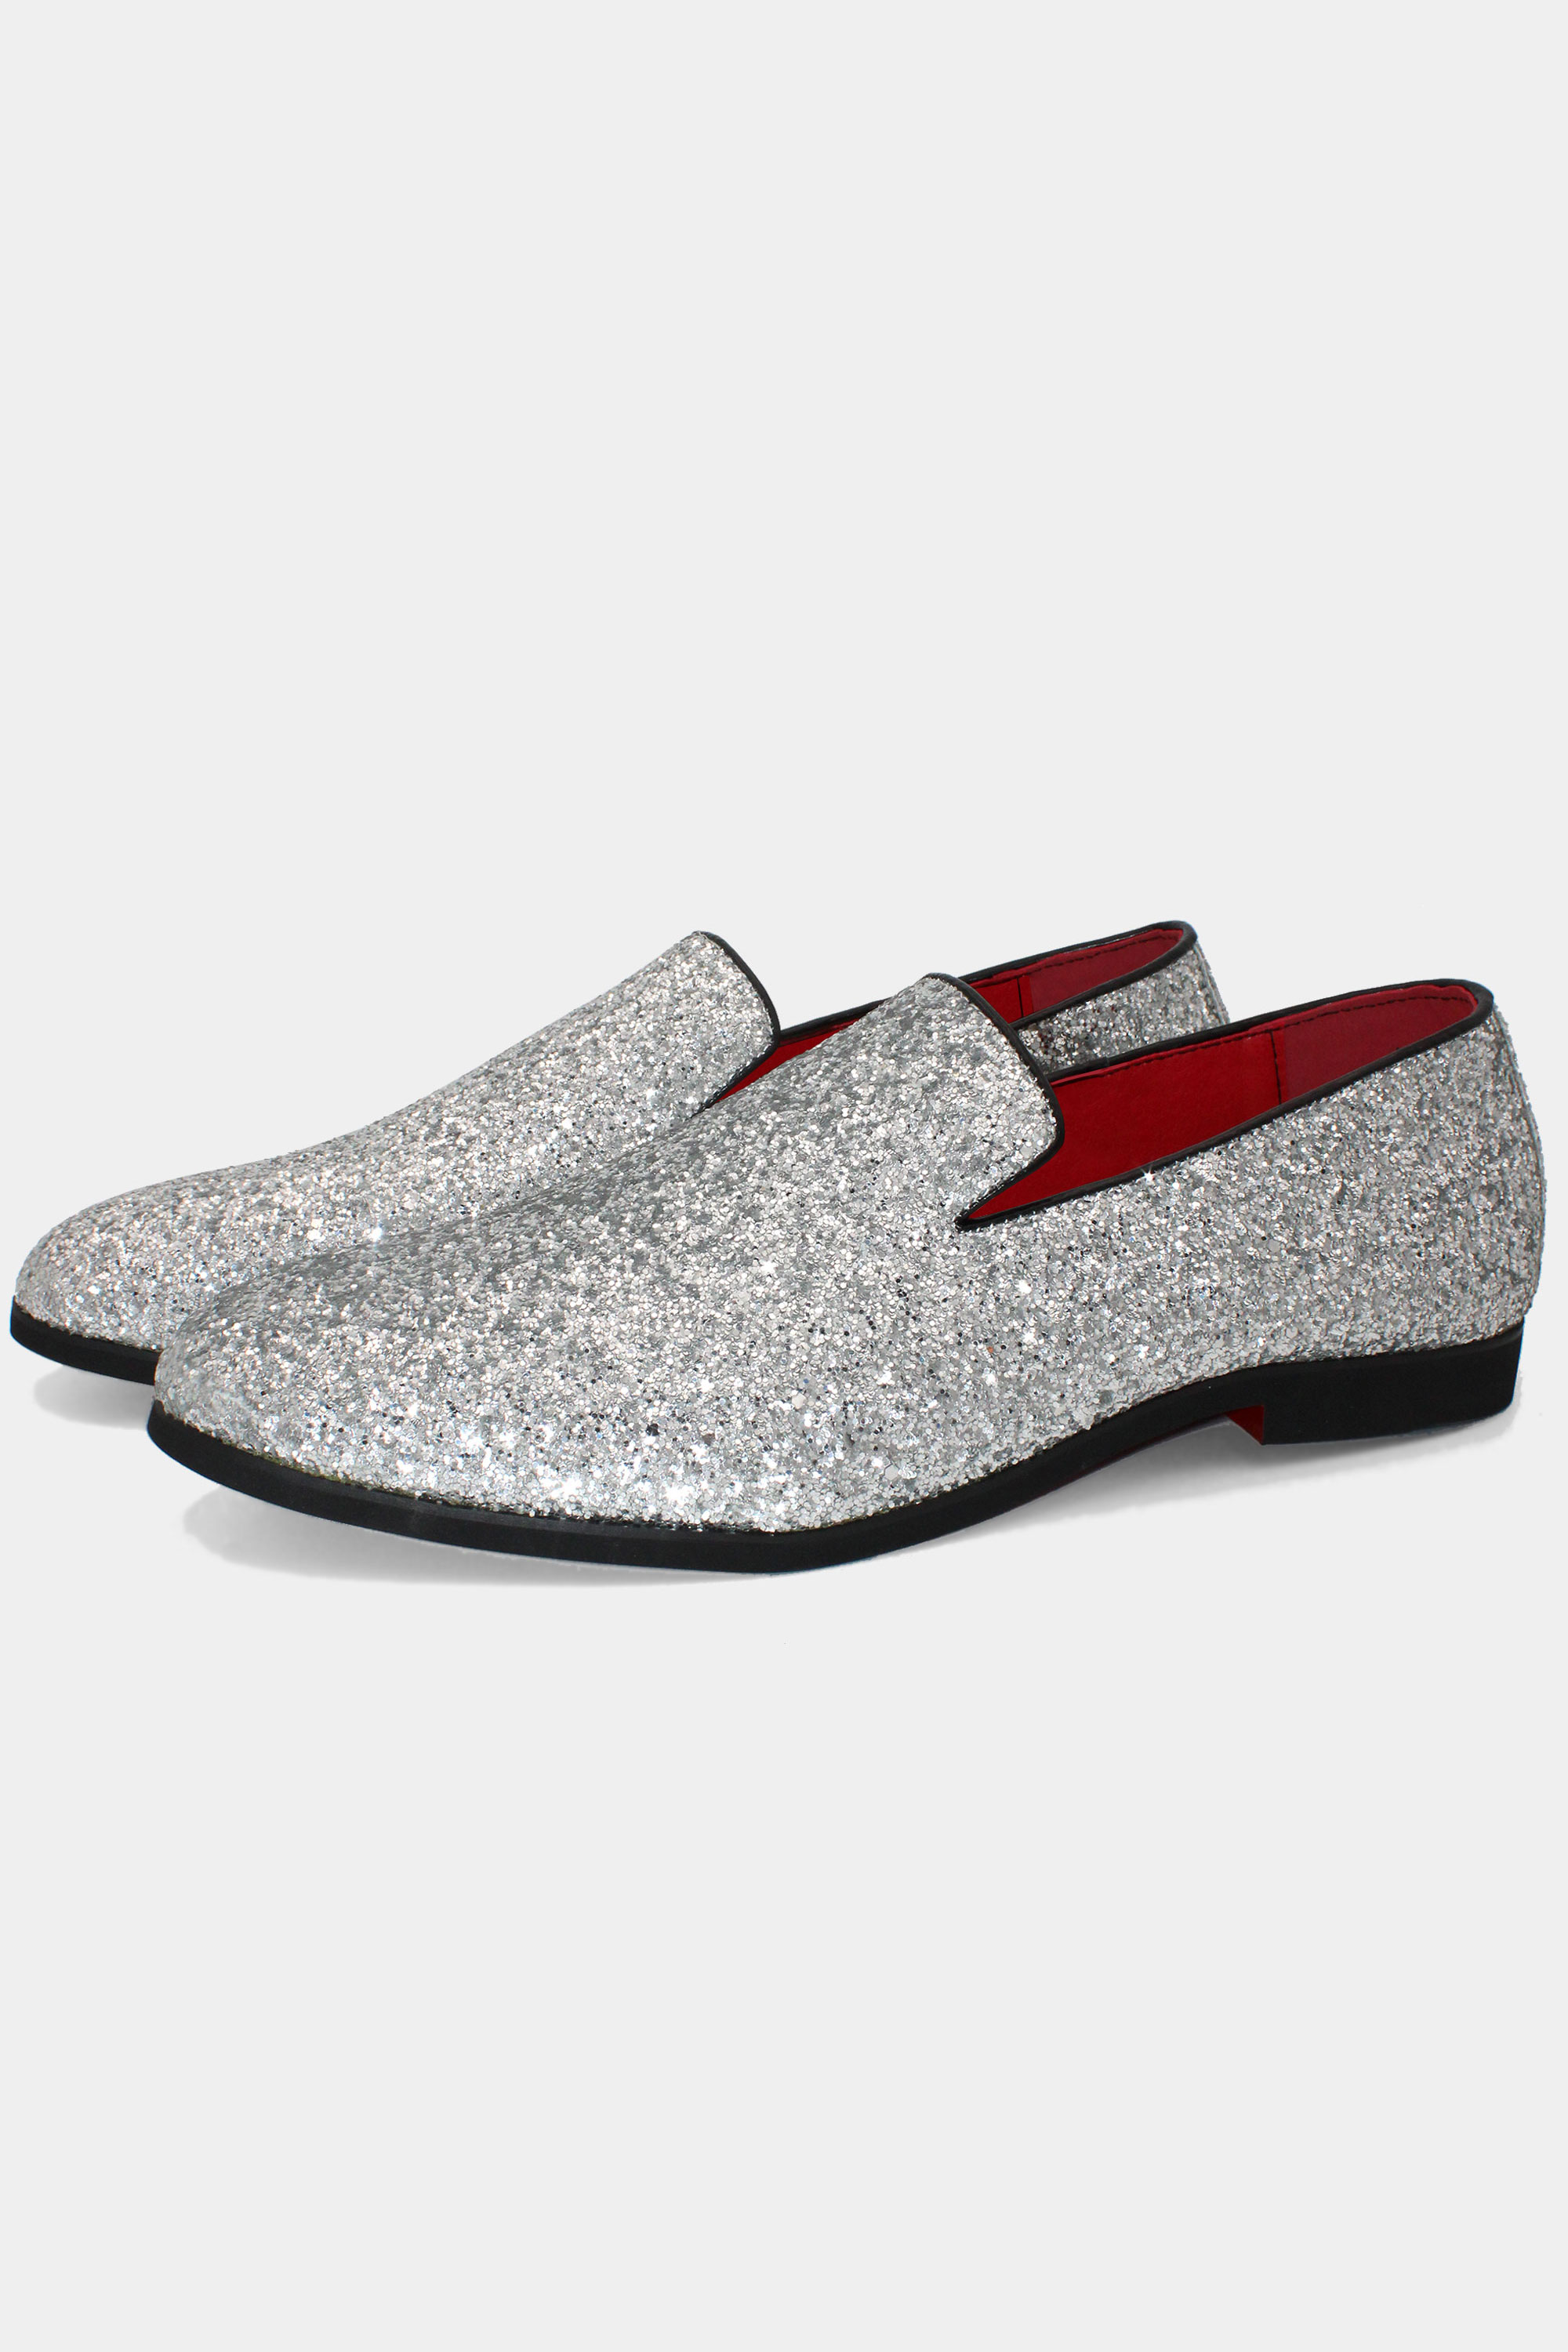 Silver Glitter Shoes Loafers